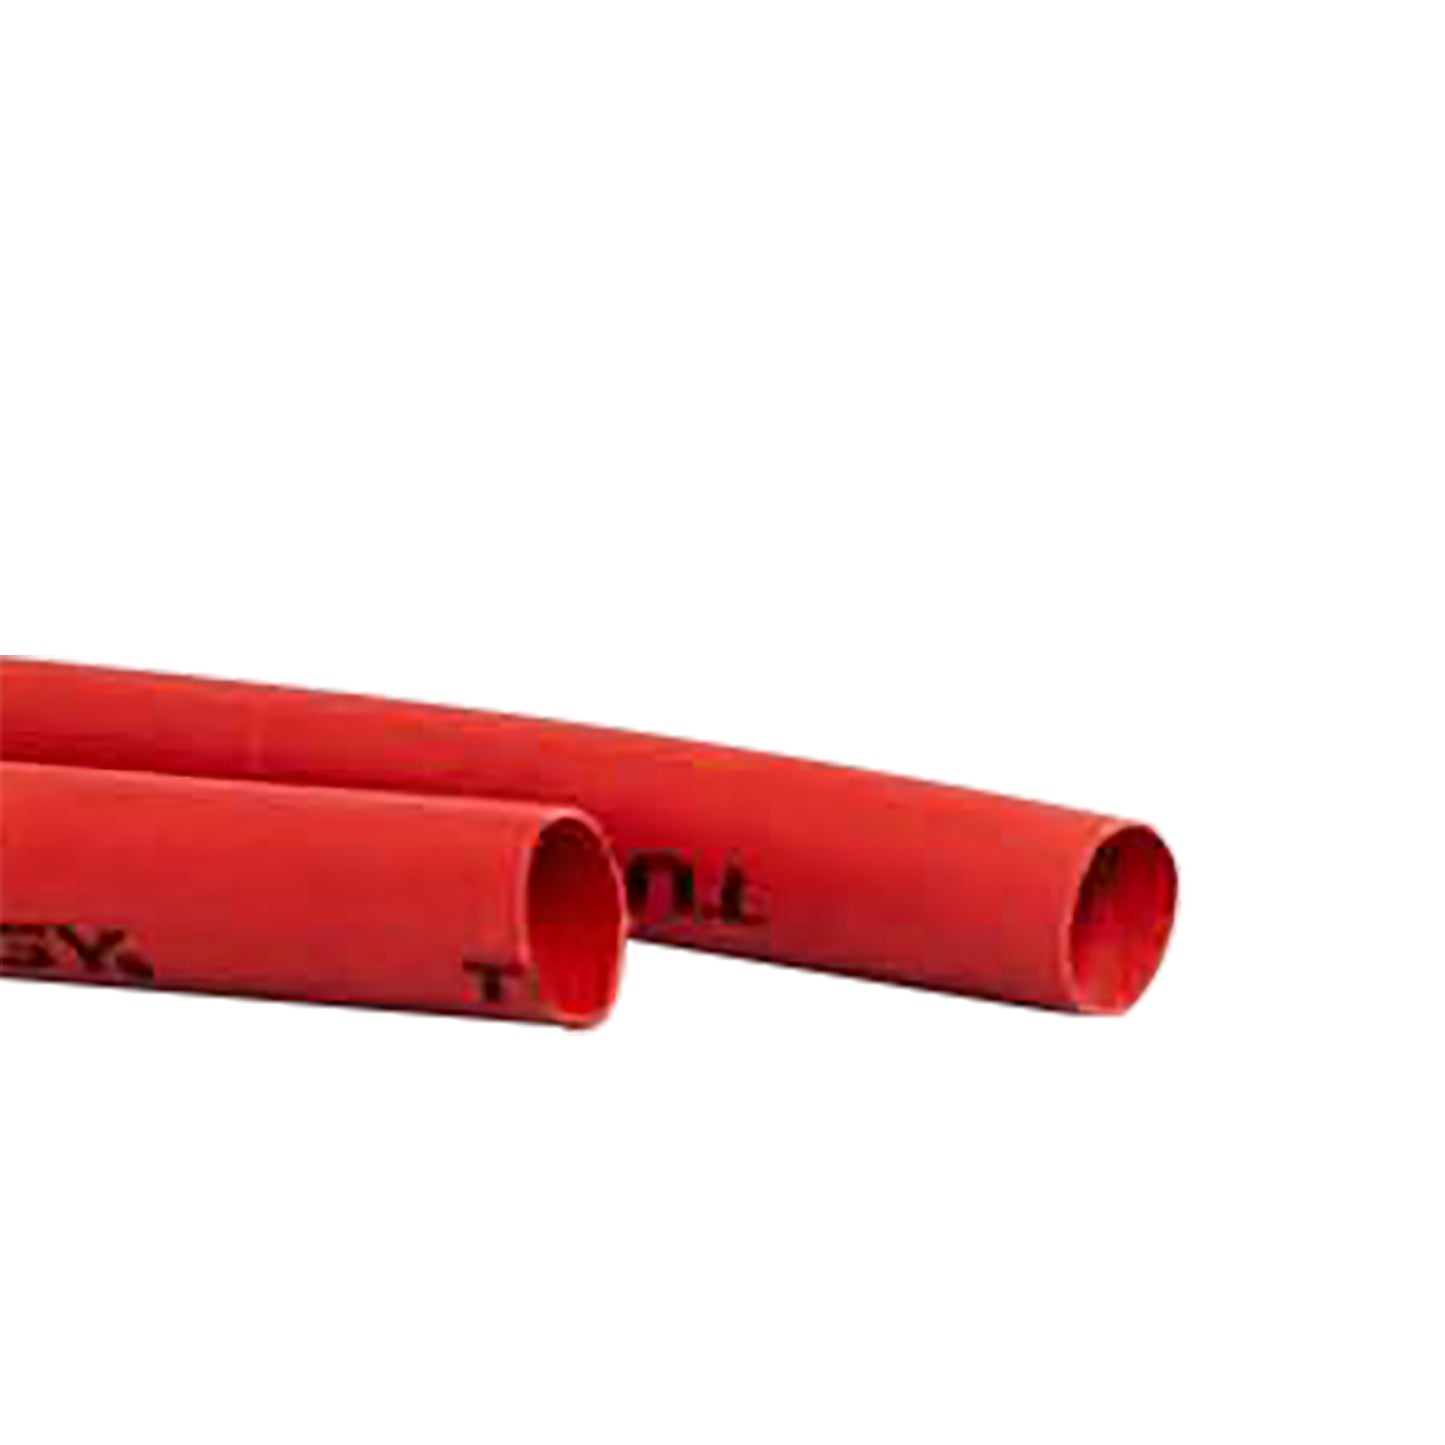 Flexible Thin Single Wall Non-Adhesive Heat Shrink Tubing 2:1 Red 1/8" ID - 12" Inch 10 Pack